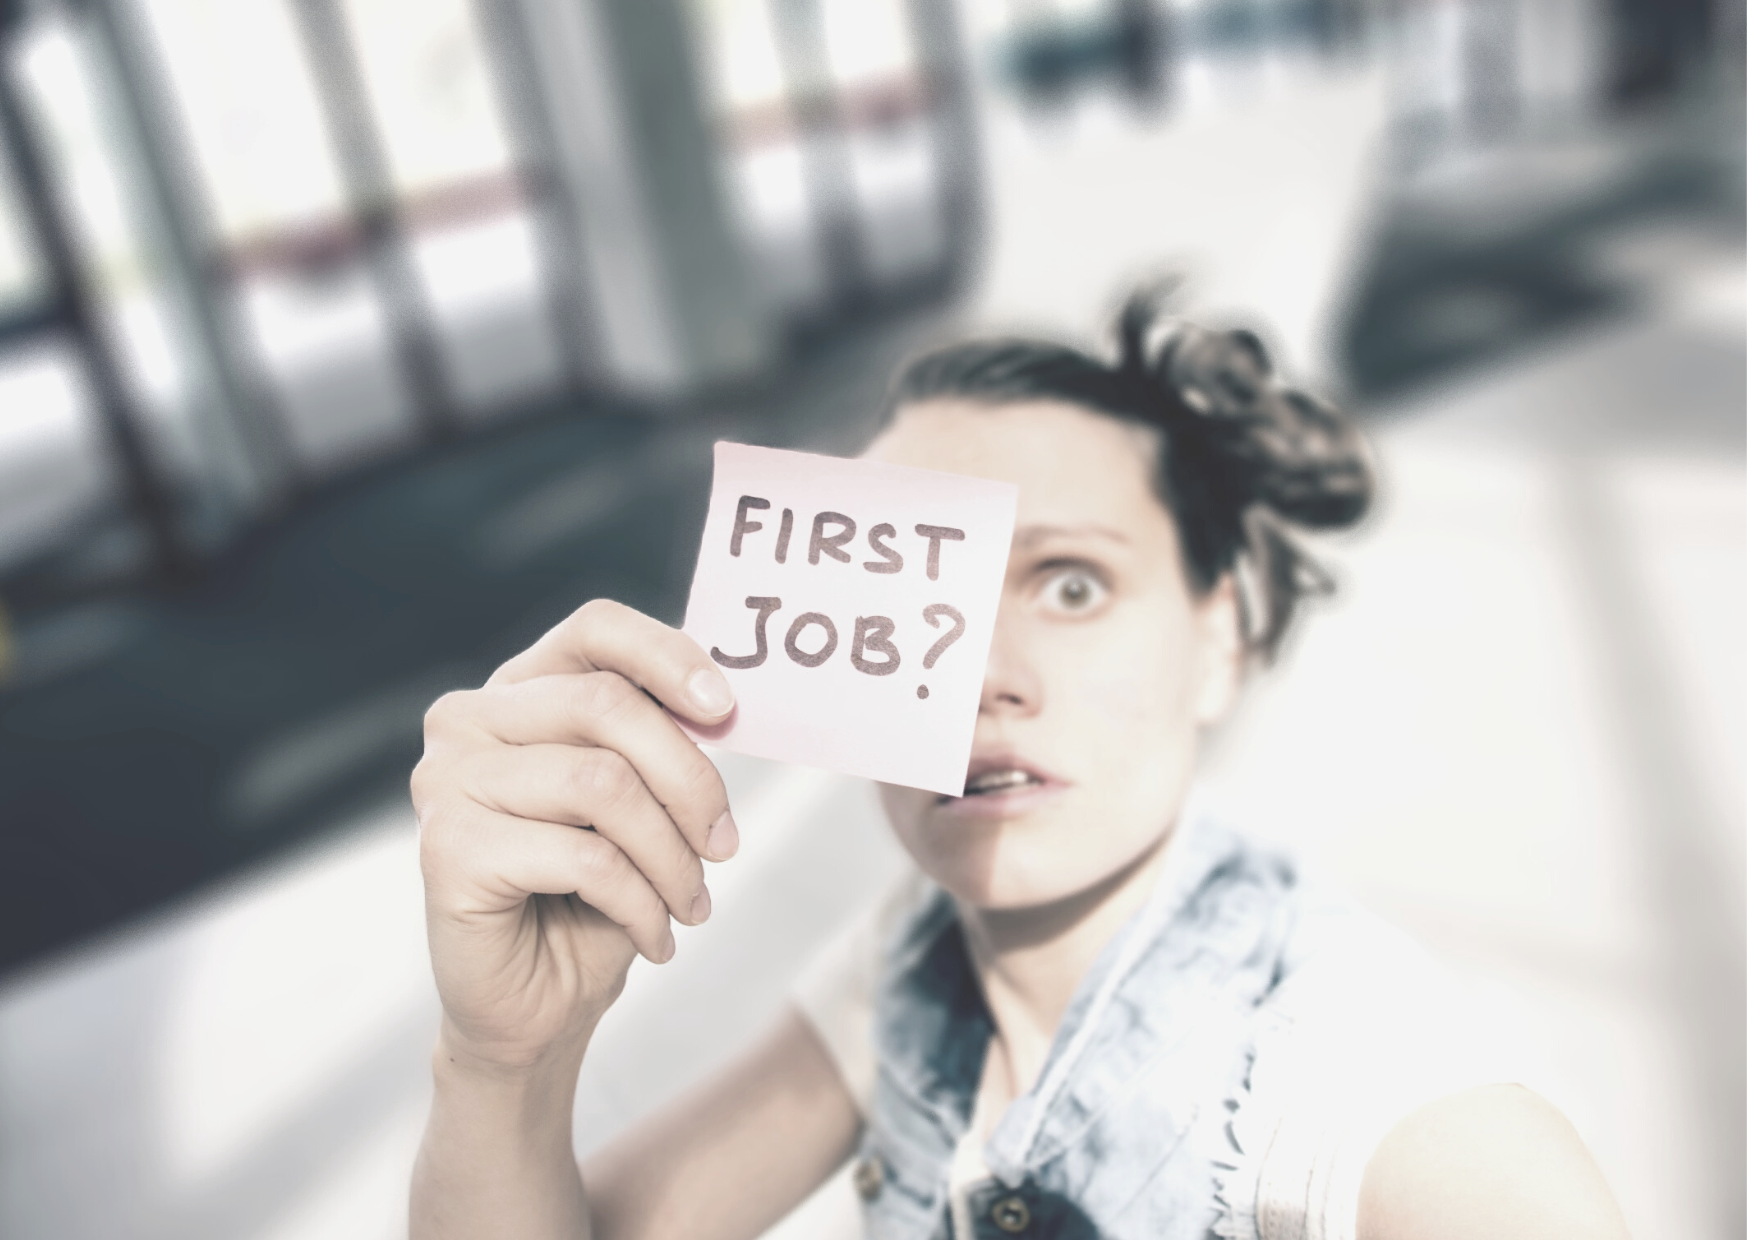 Why are you finding it difficult to land your first job?